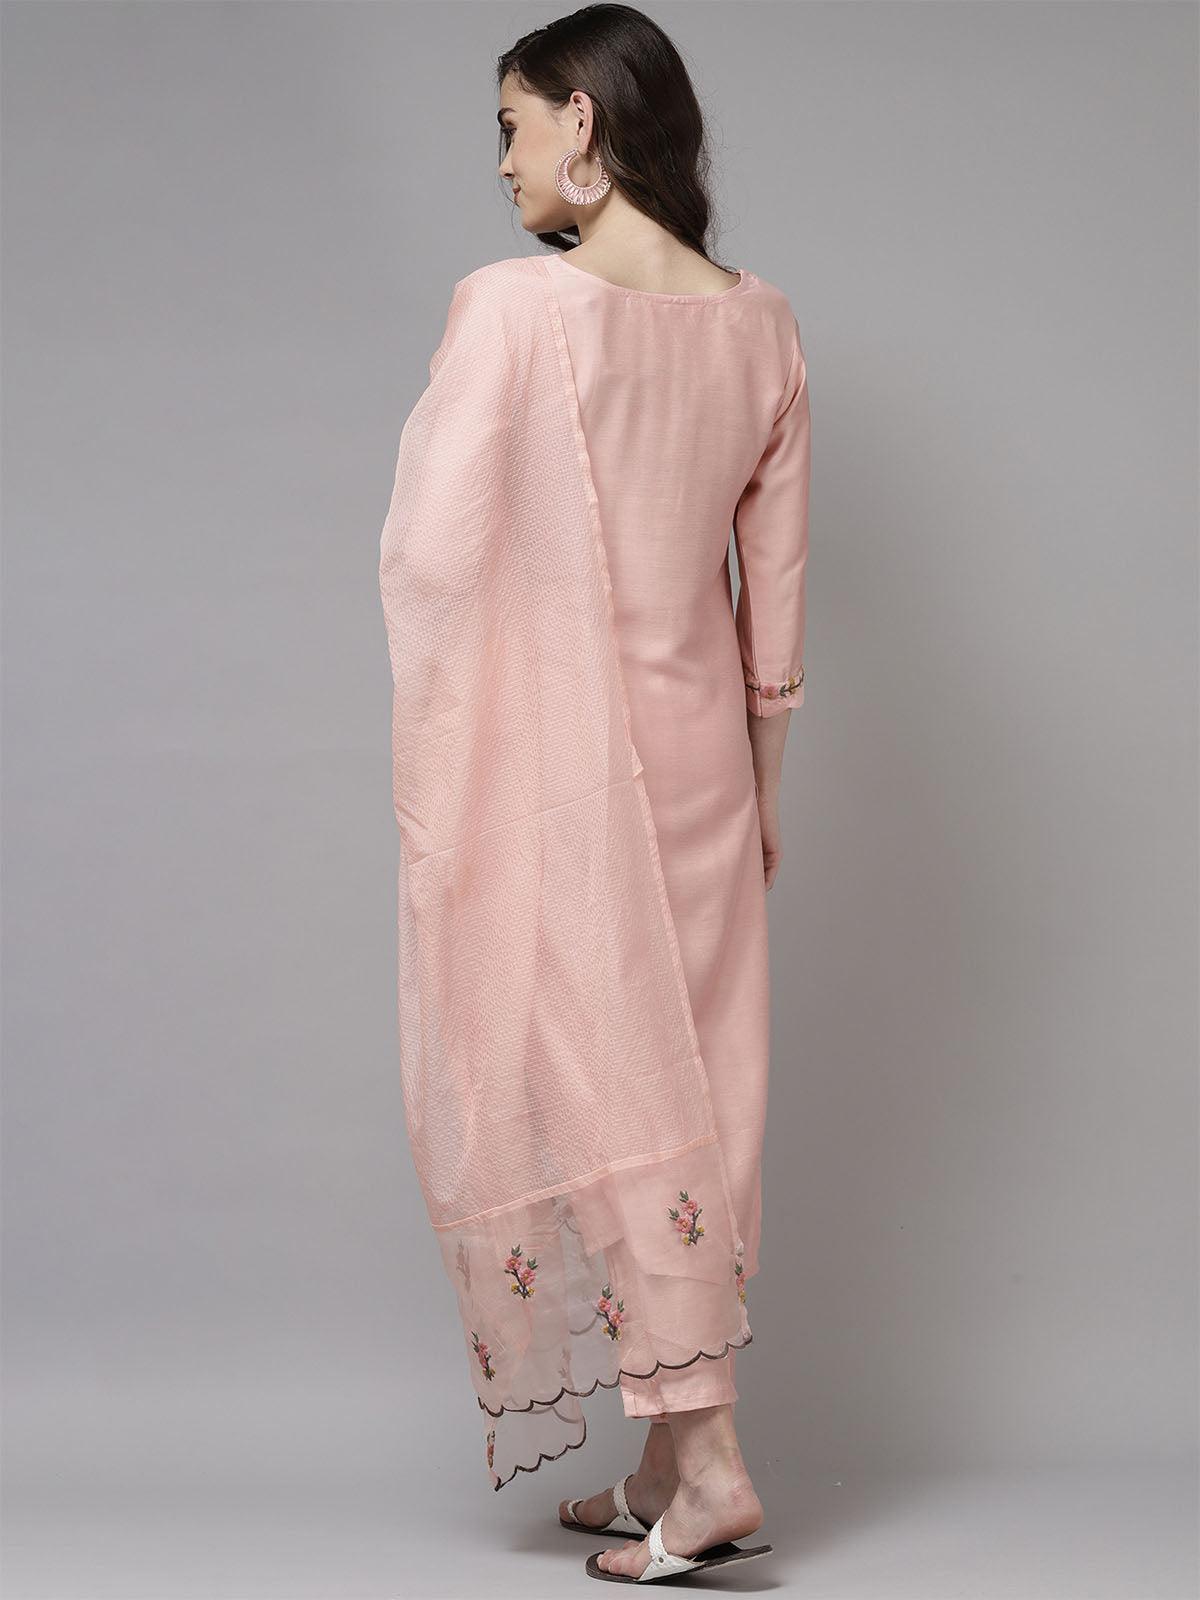 Women's Baby Pink Embroidered Straight Kurta Trouser With Dupatta Set - Odette